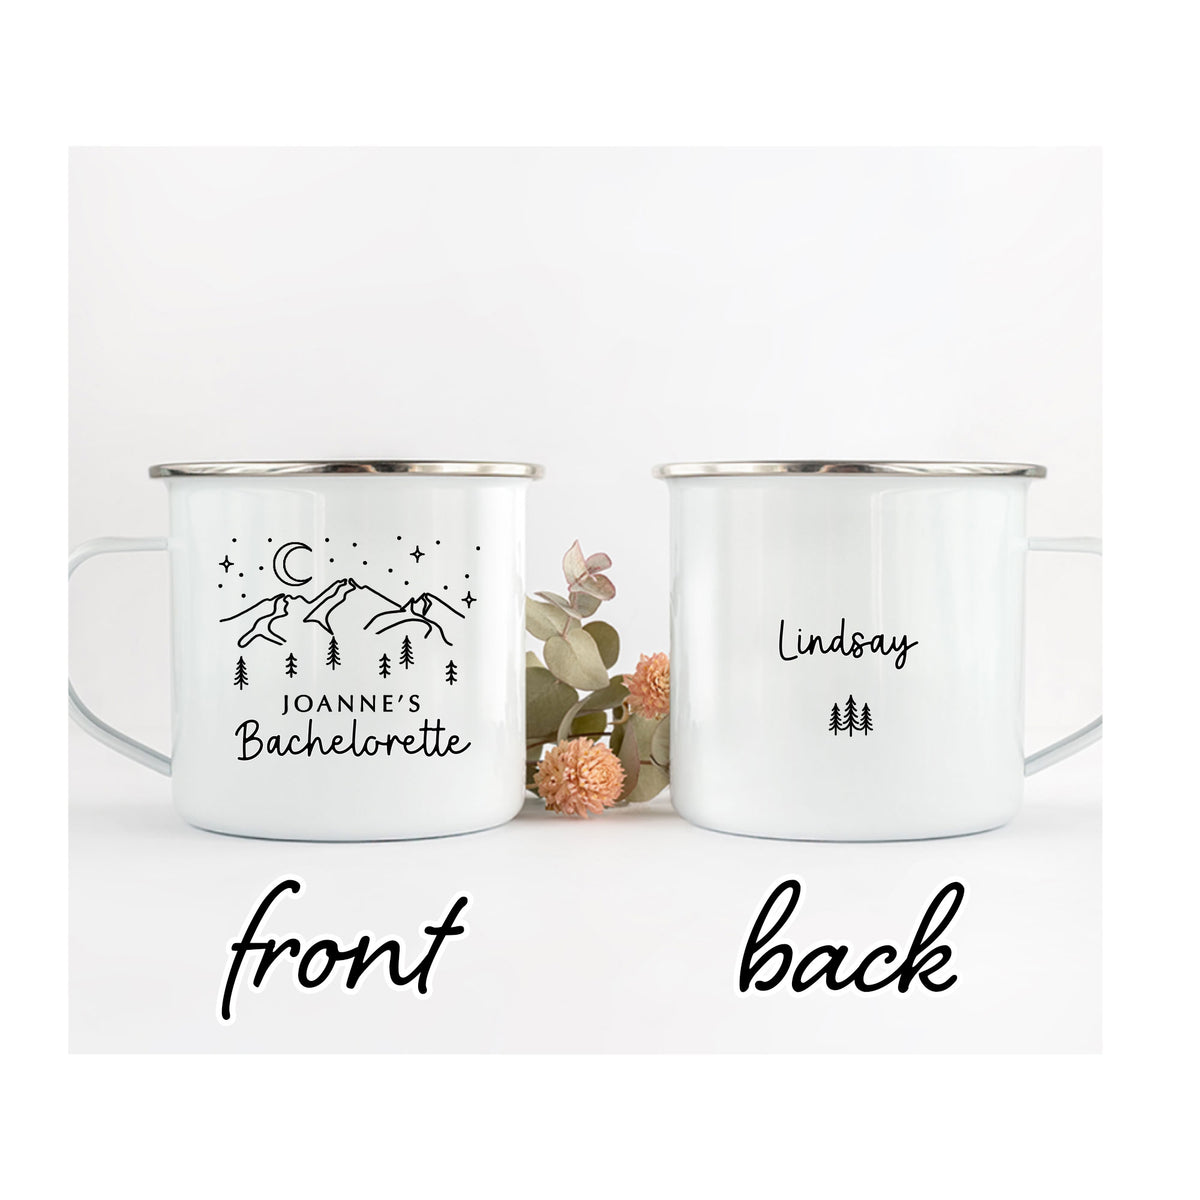 Bachelorette Party Mug with Mountains and Stars